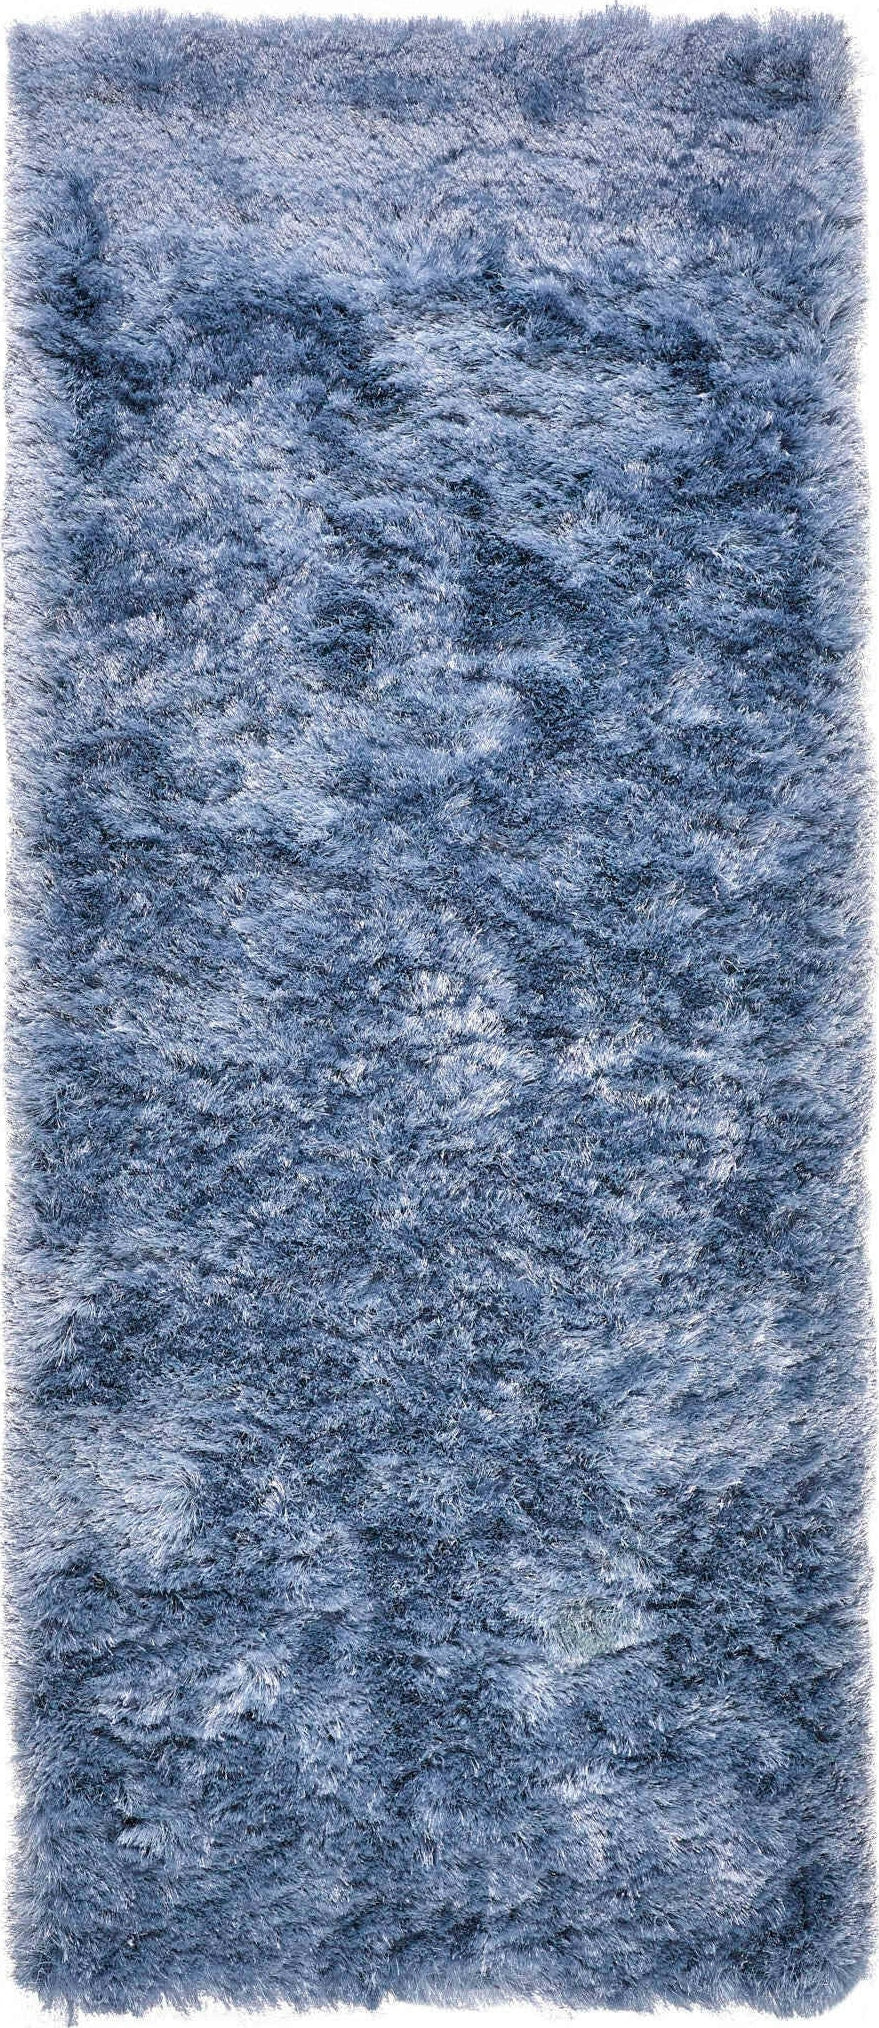 Feizy Indochine 4550F Blue/Silver Area Rug Lifestyle Image Feature